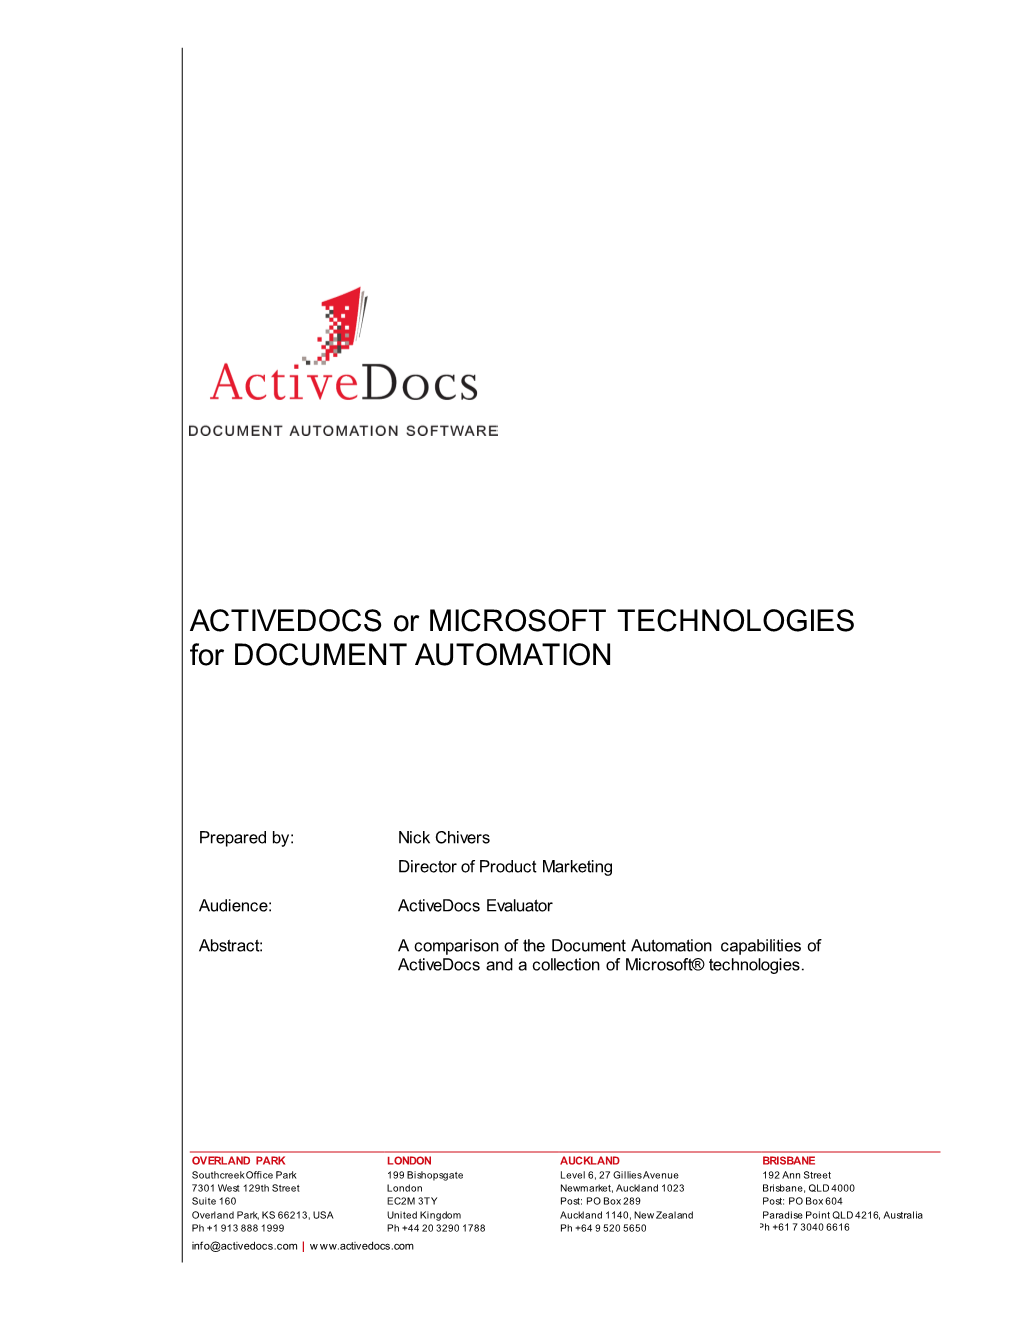 ACTIVEDOCS Or MICROSOFT TECHNOLOGIES for DOCUMENT AUTOMATION